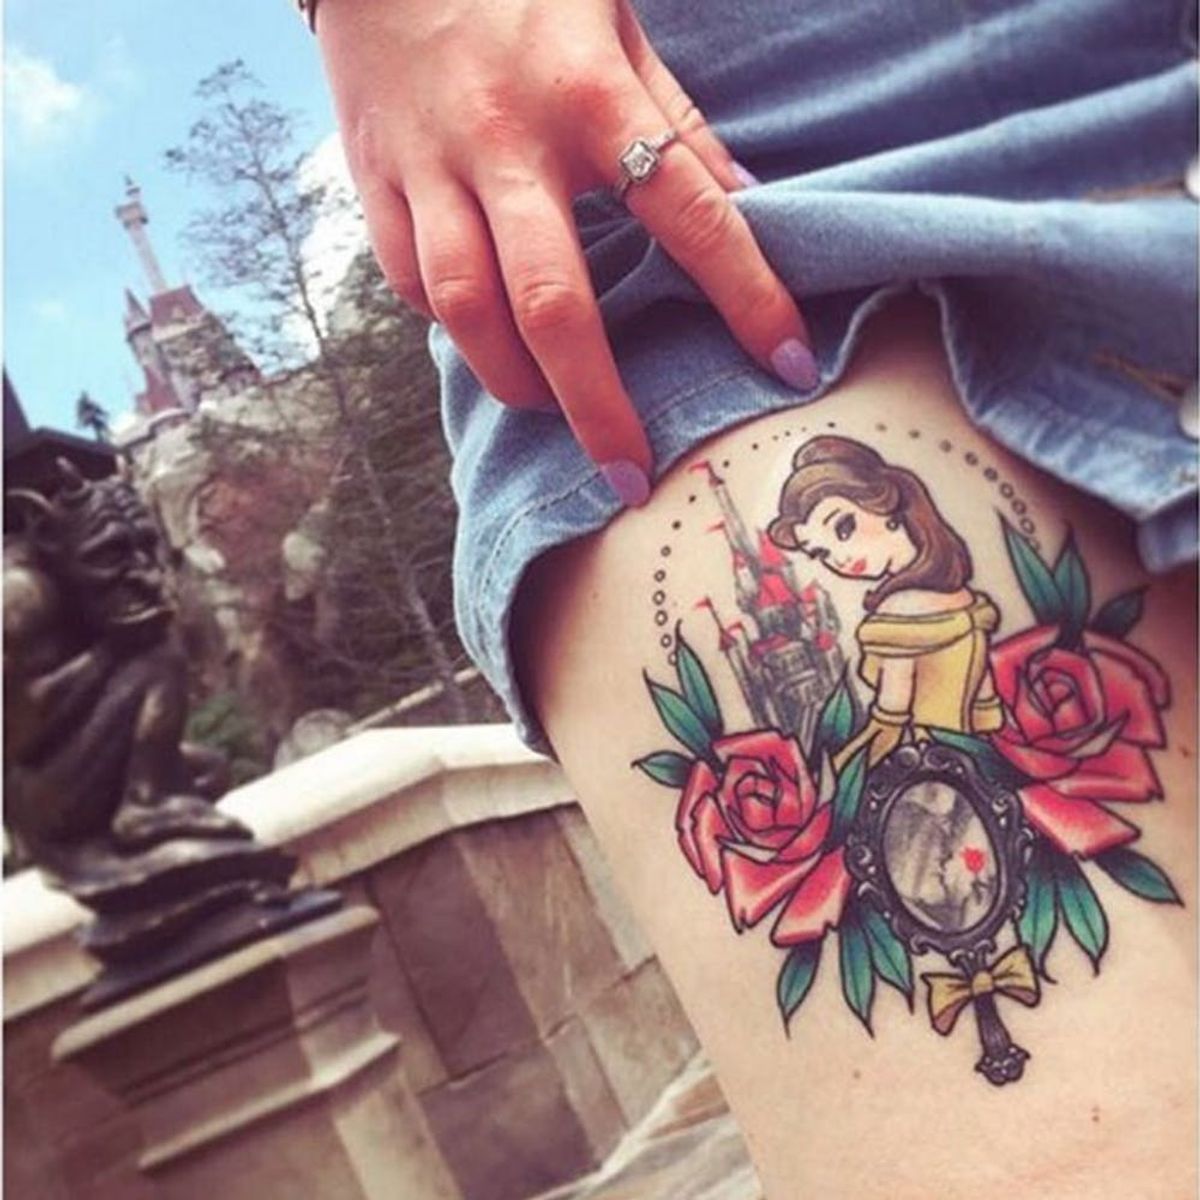 11 Disney Tattoos Inspired by Beauty and the Beast